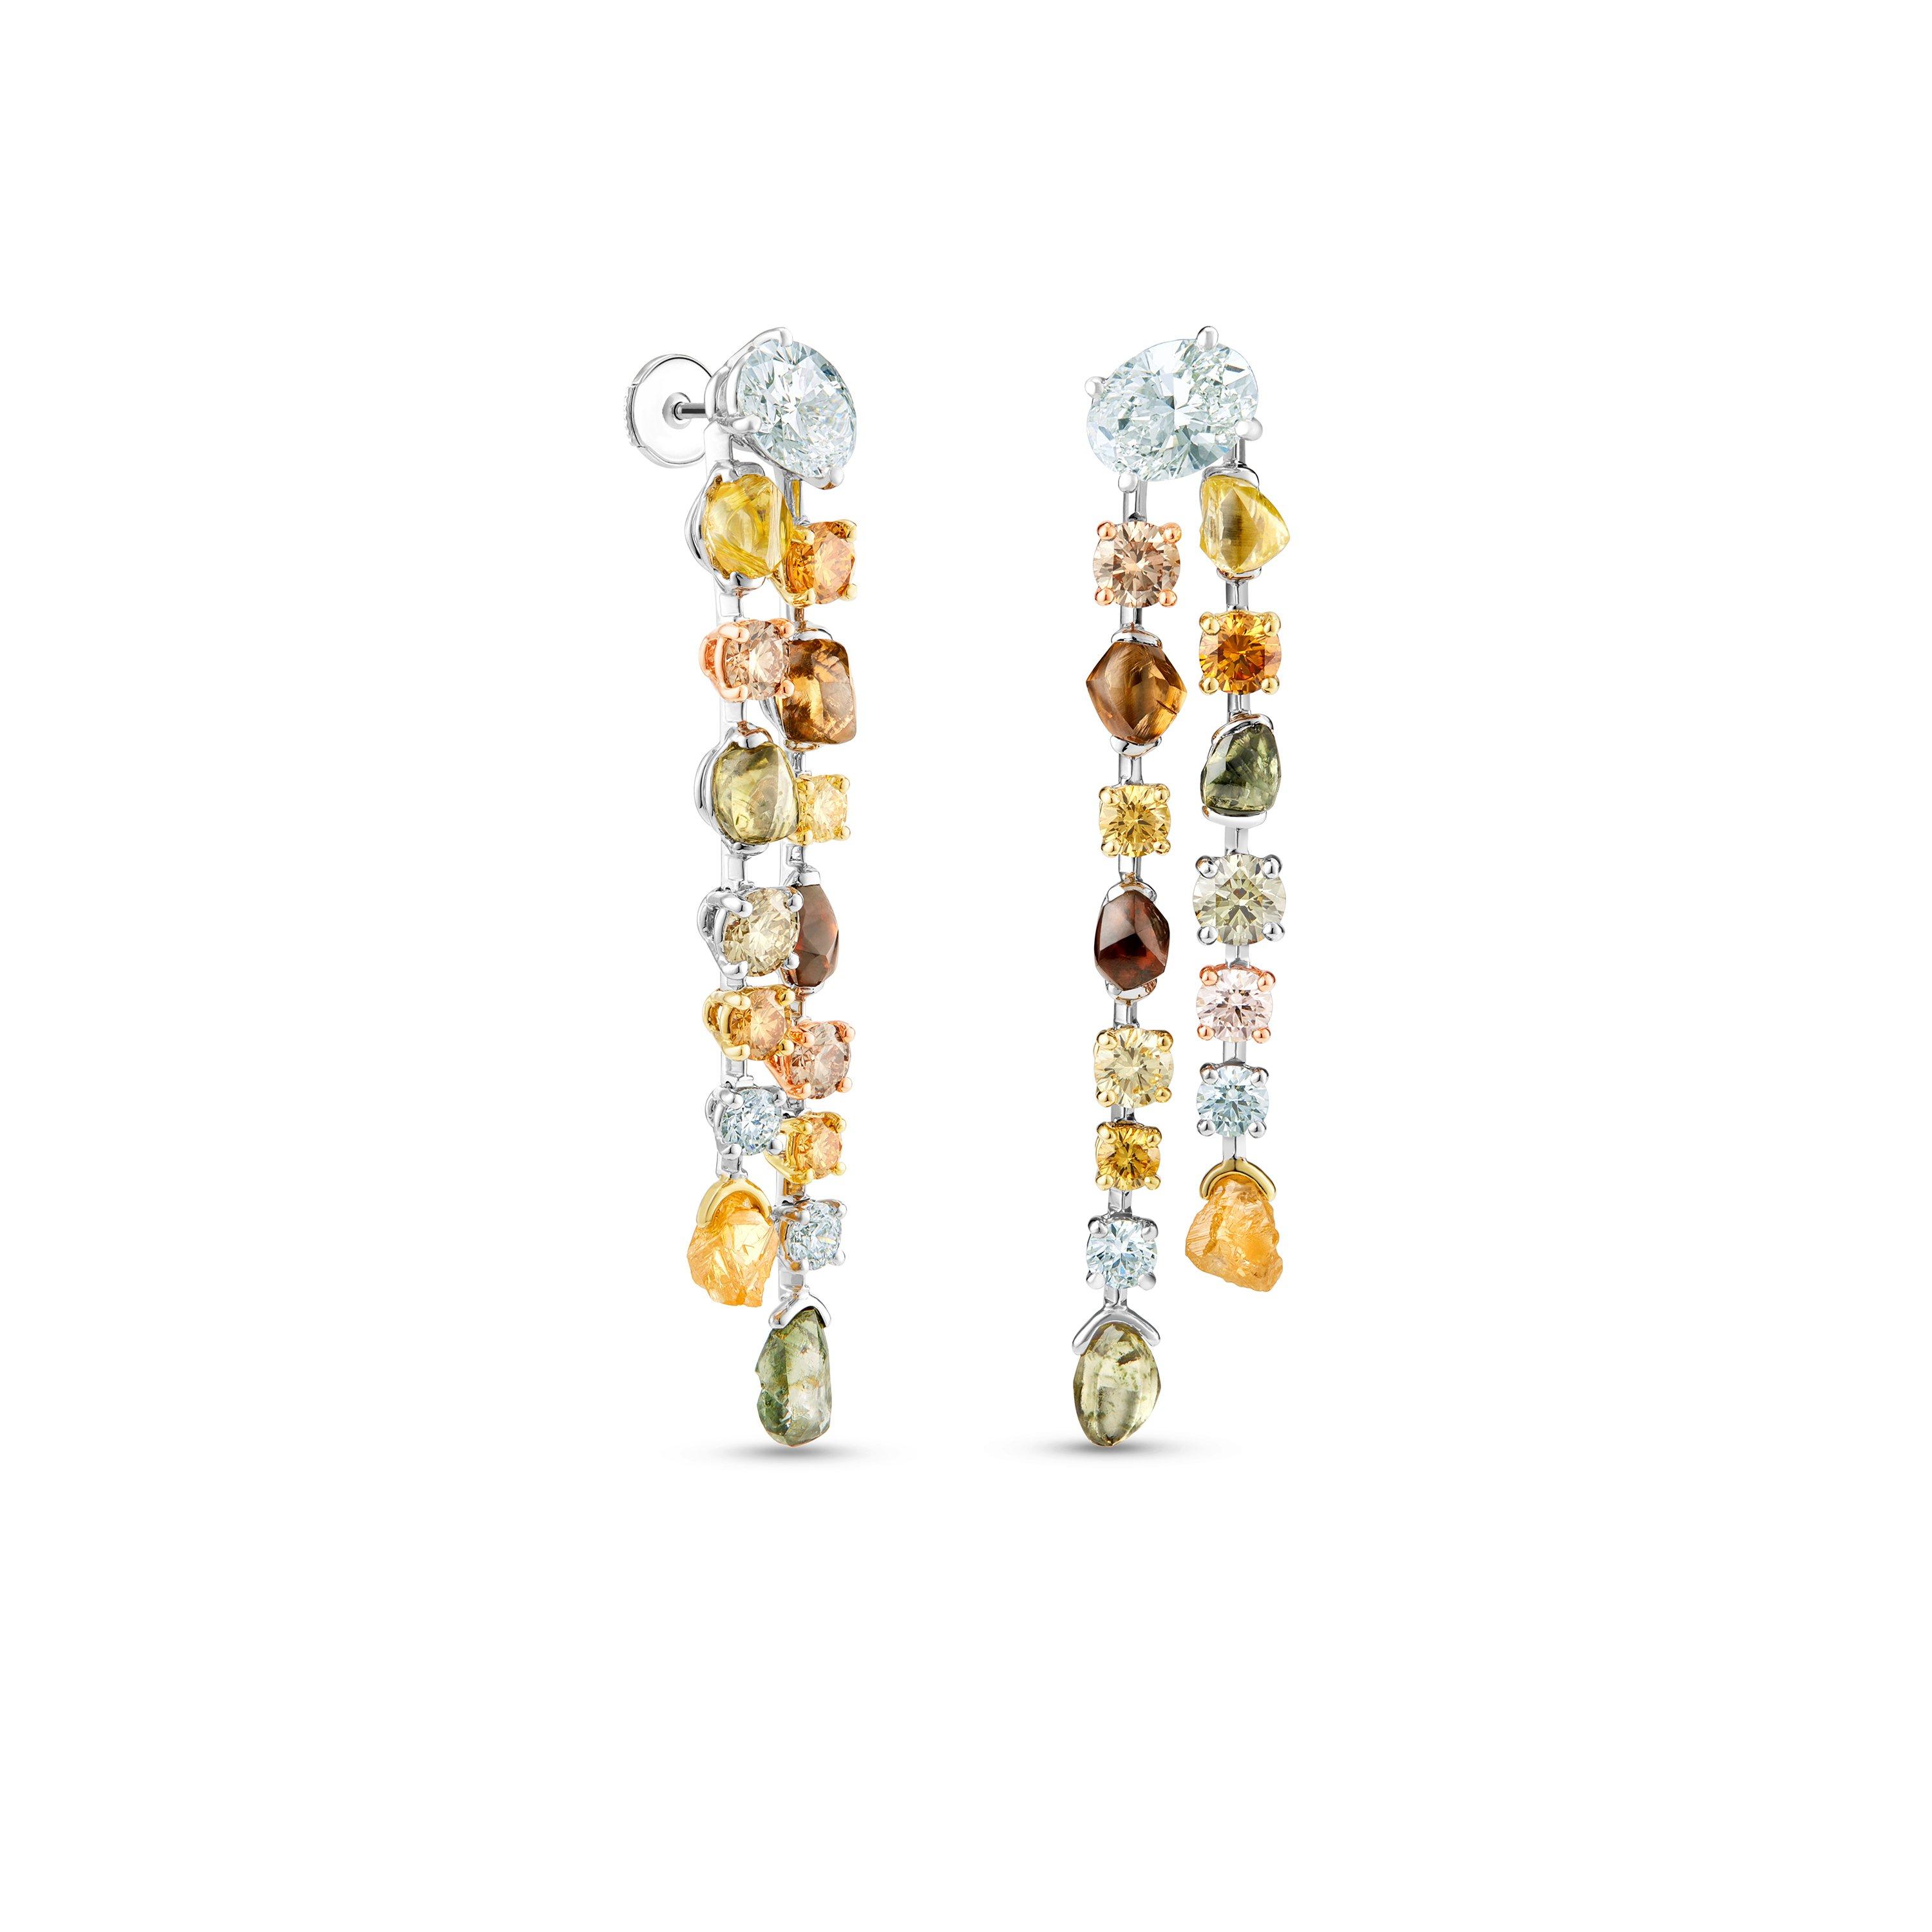 Talisman earrings in yellow gold and platinum, image 1